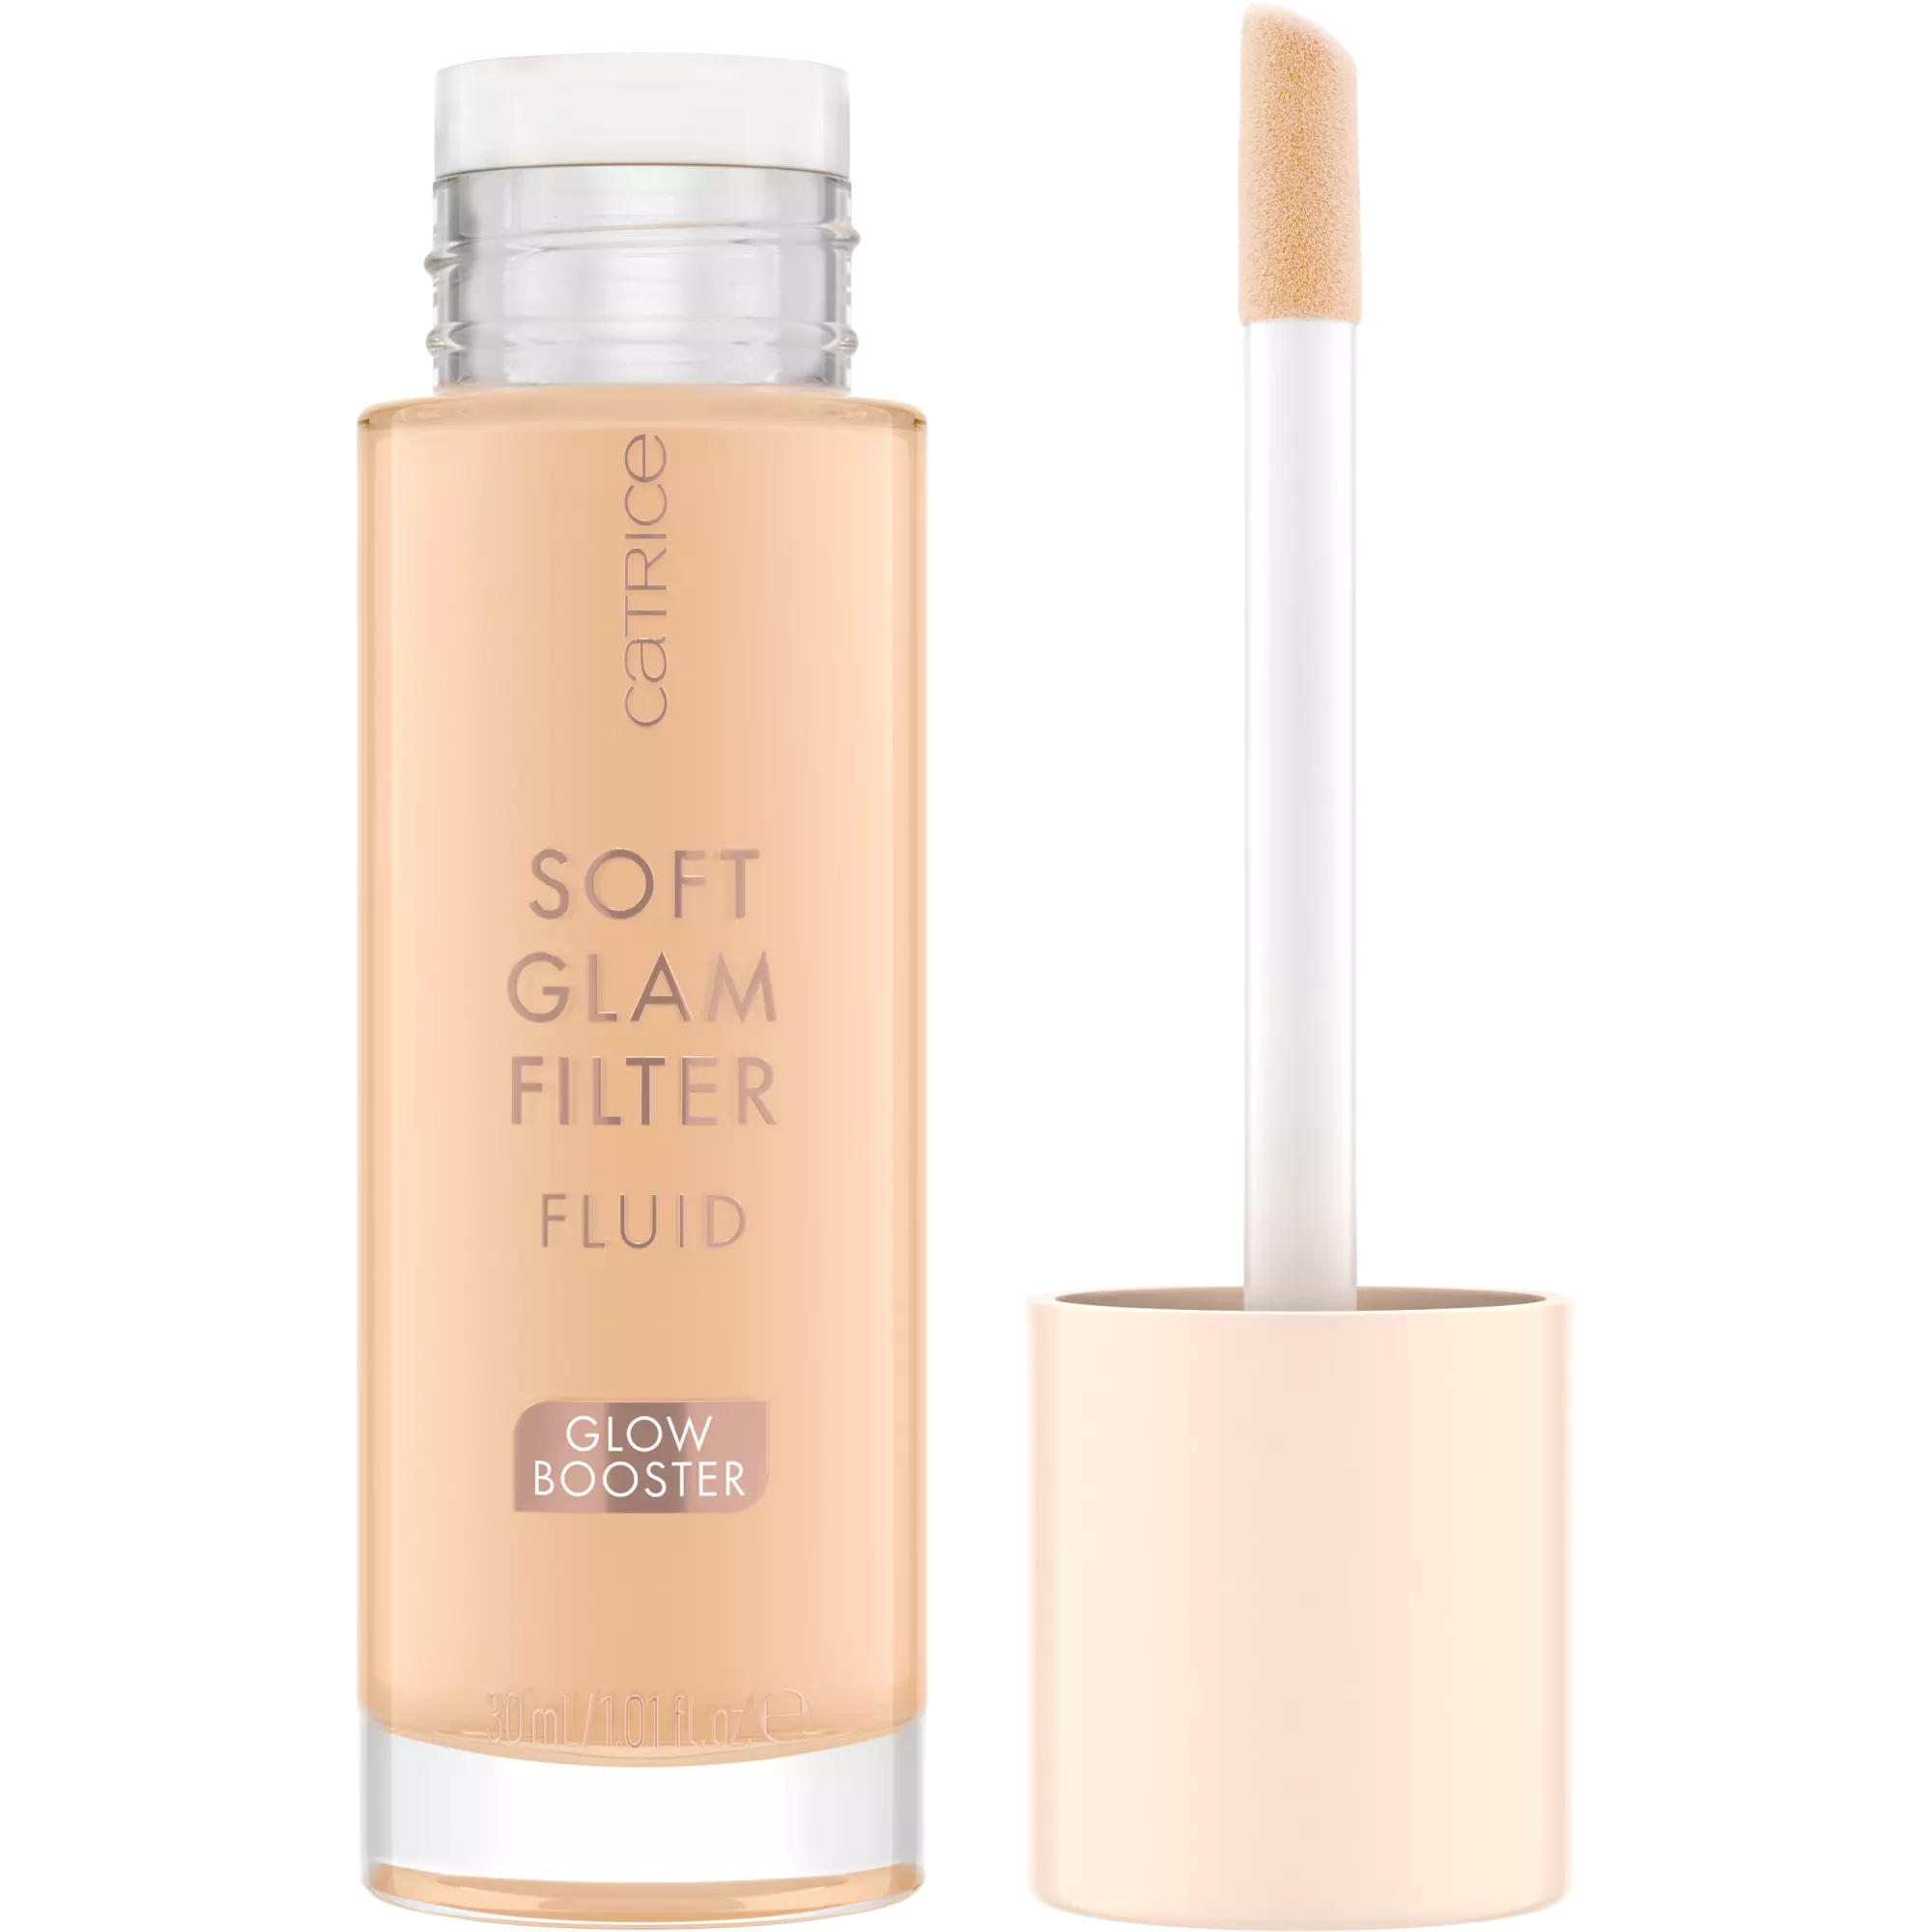 CATRICE Soft Glam Filter Fluid